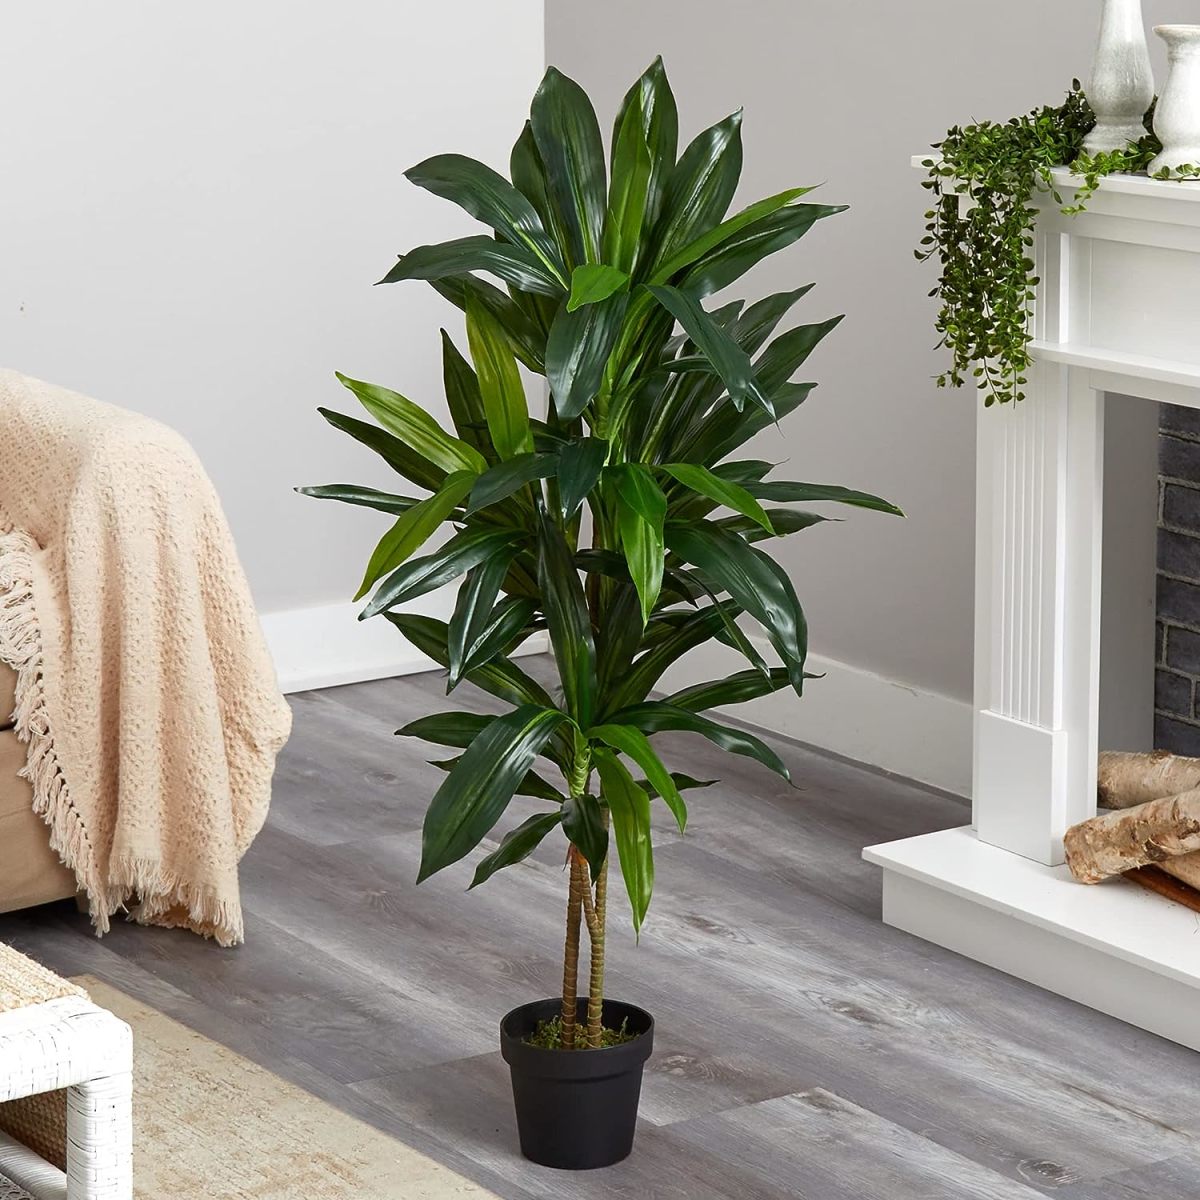 Breathe Life into Your Space with the Nearly Natural Real Touch Dracaena Plant